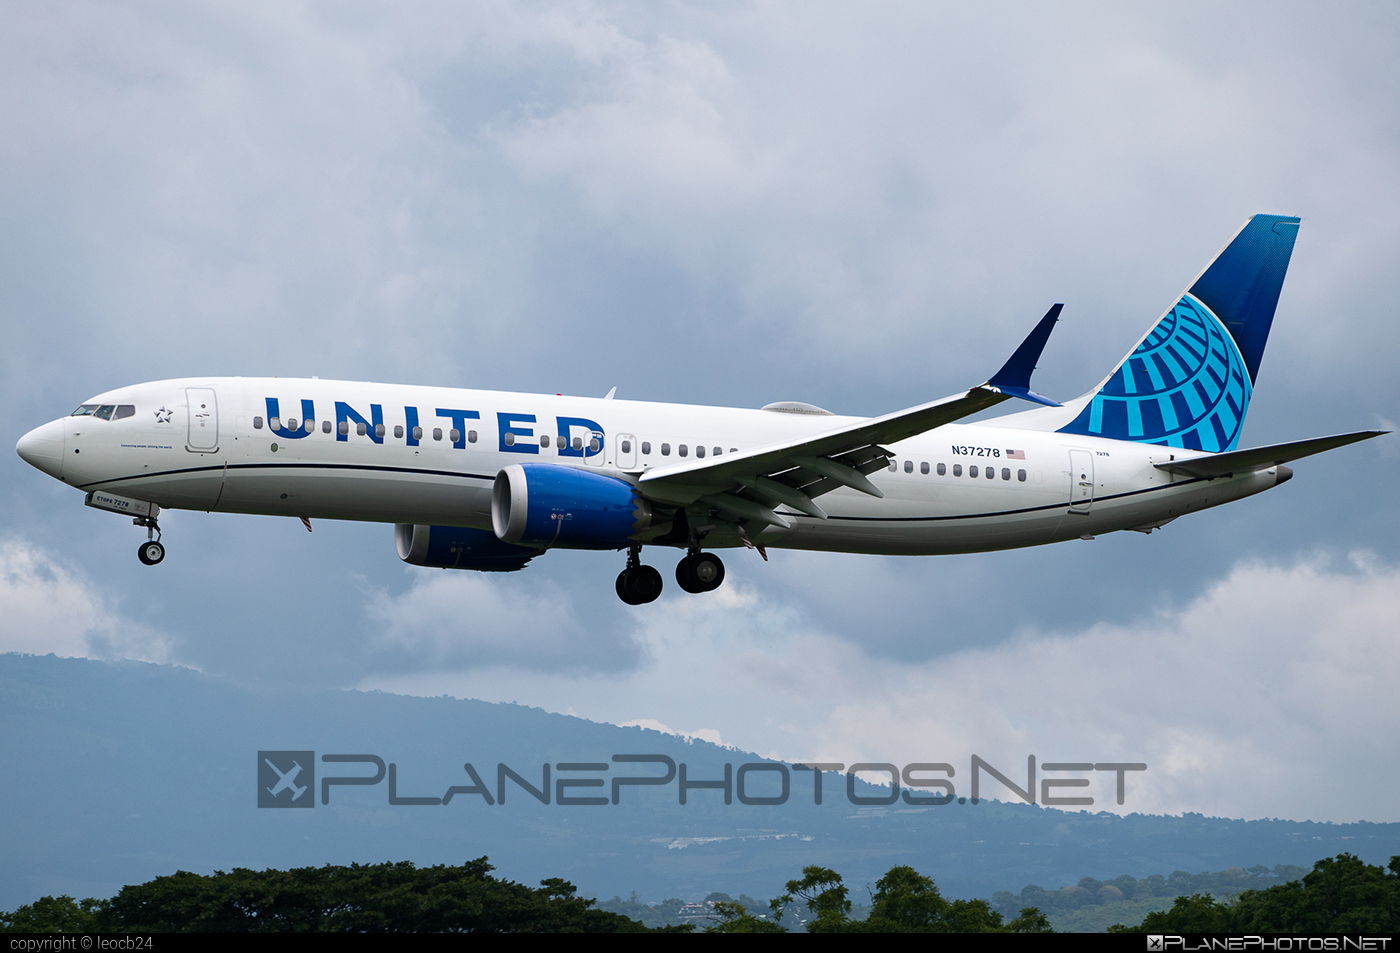 Boeing 737-8 MAX - N37278 operated by United Airlines #b737 #b737max #boeing #boeing737 #unitedairlines